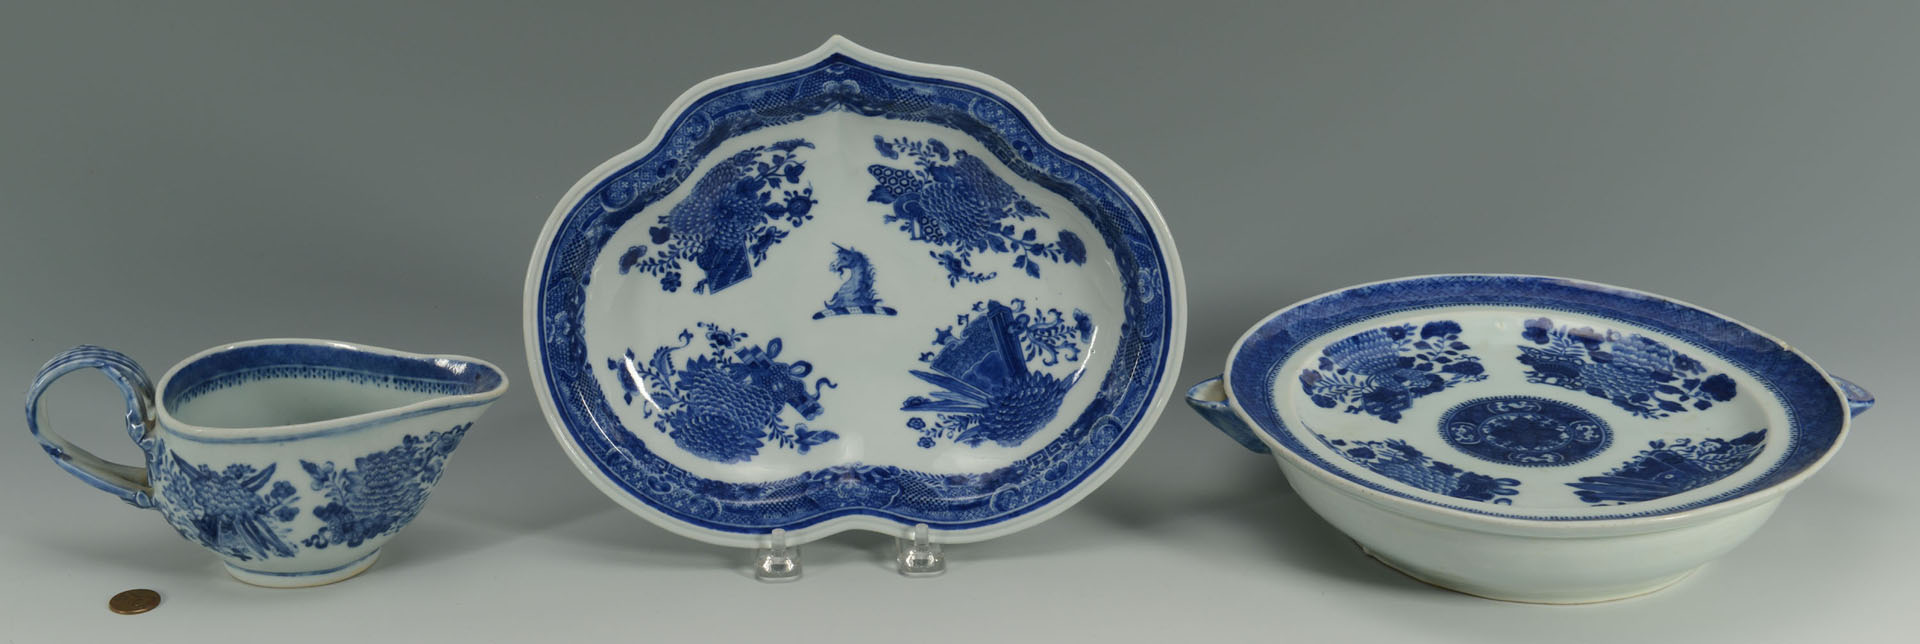 Lot 21: 3 Chinese Export Porcelain Blue Fitzhugh Items